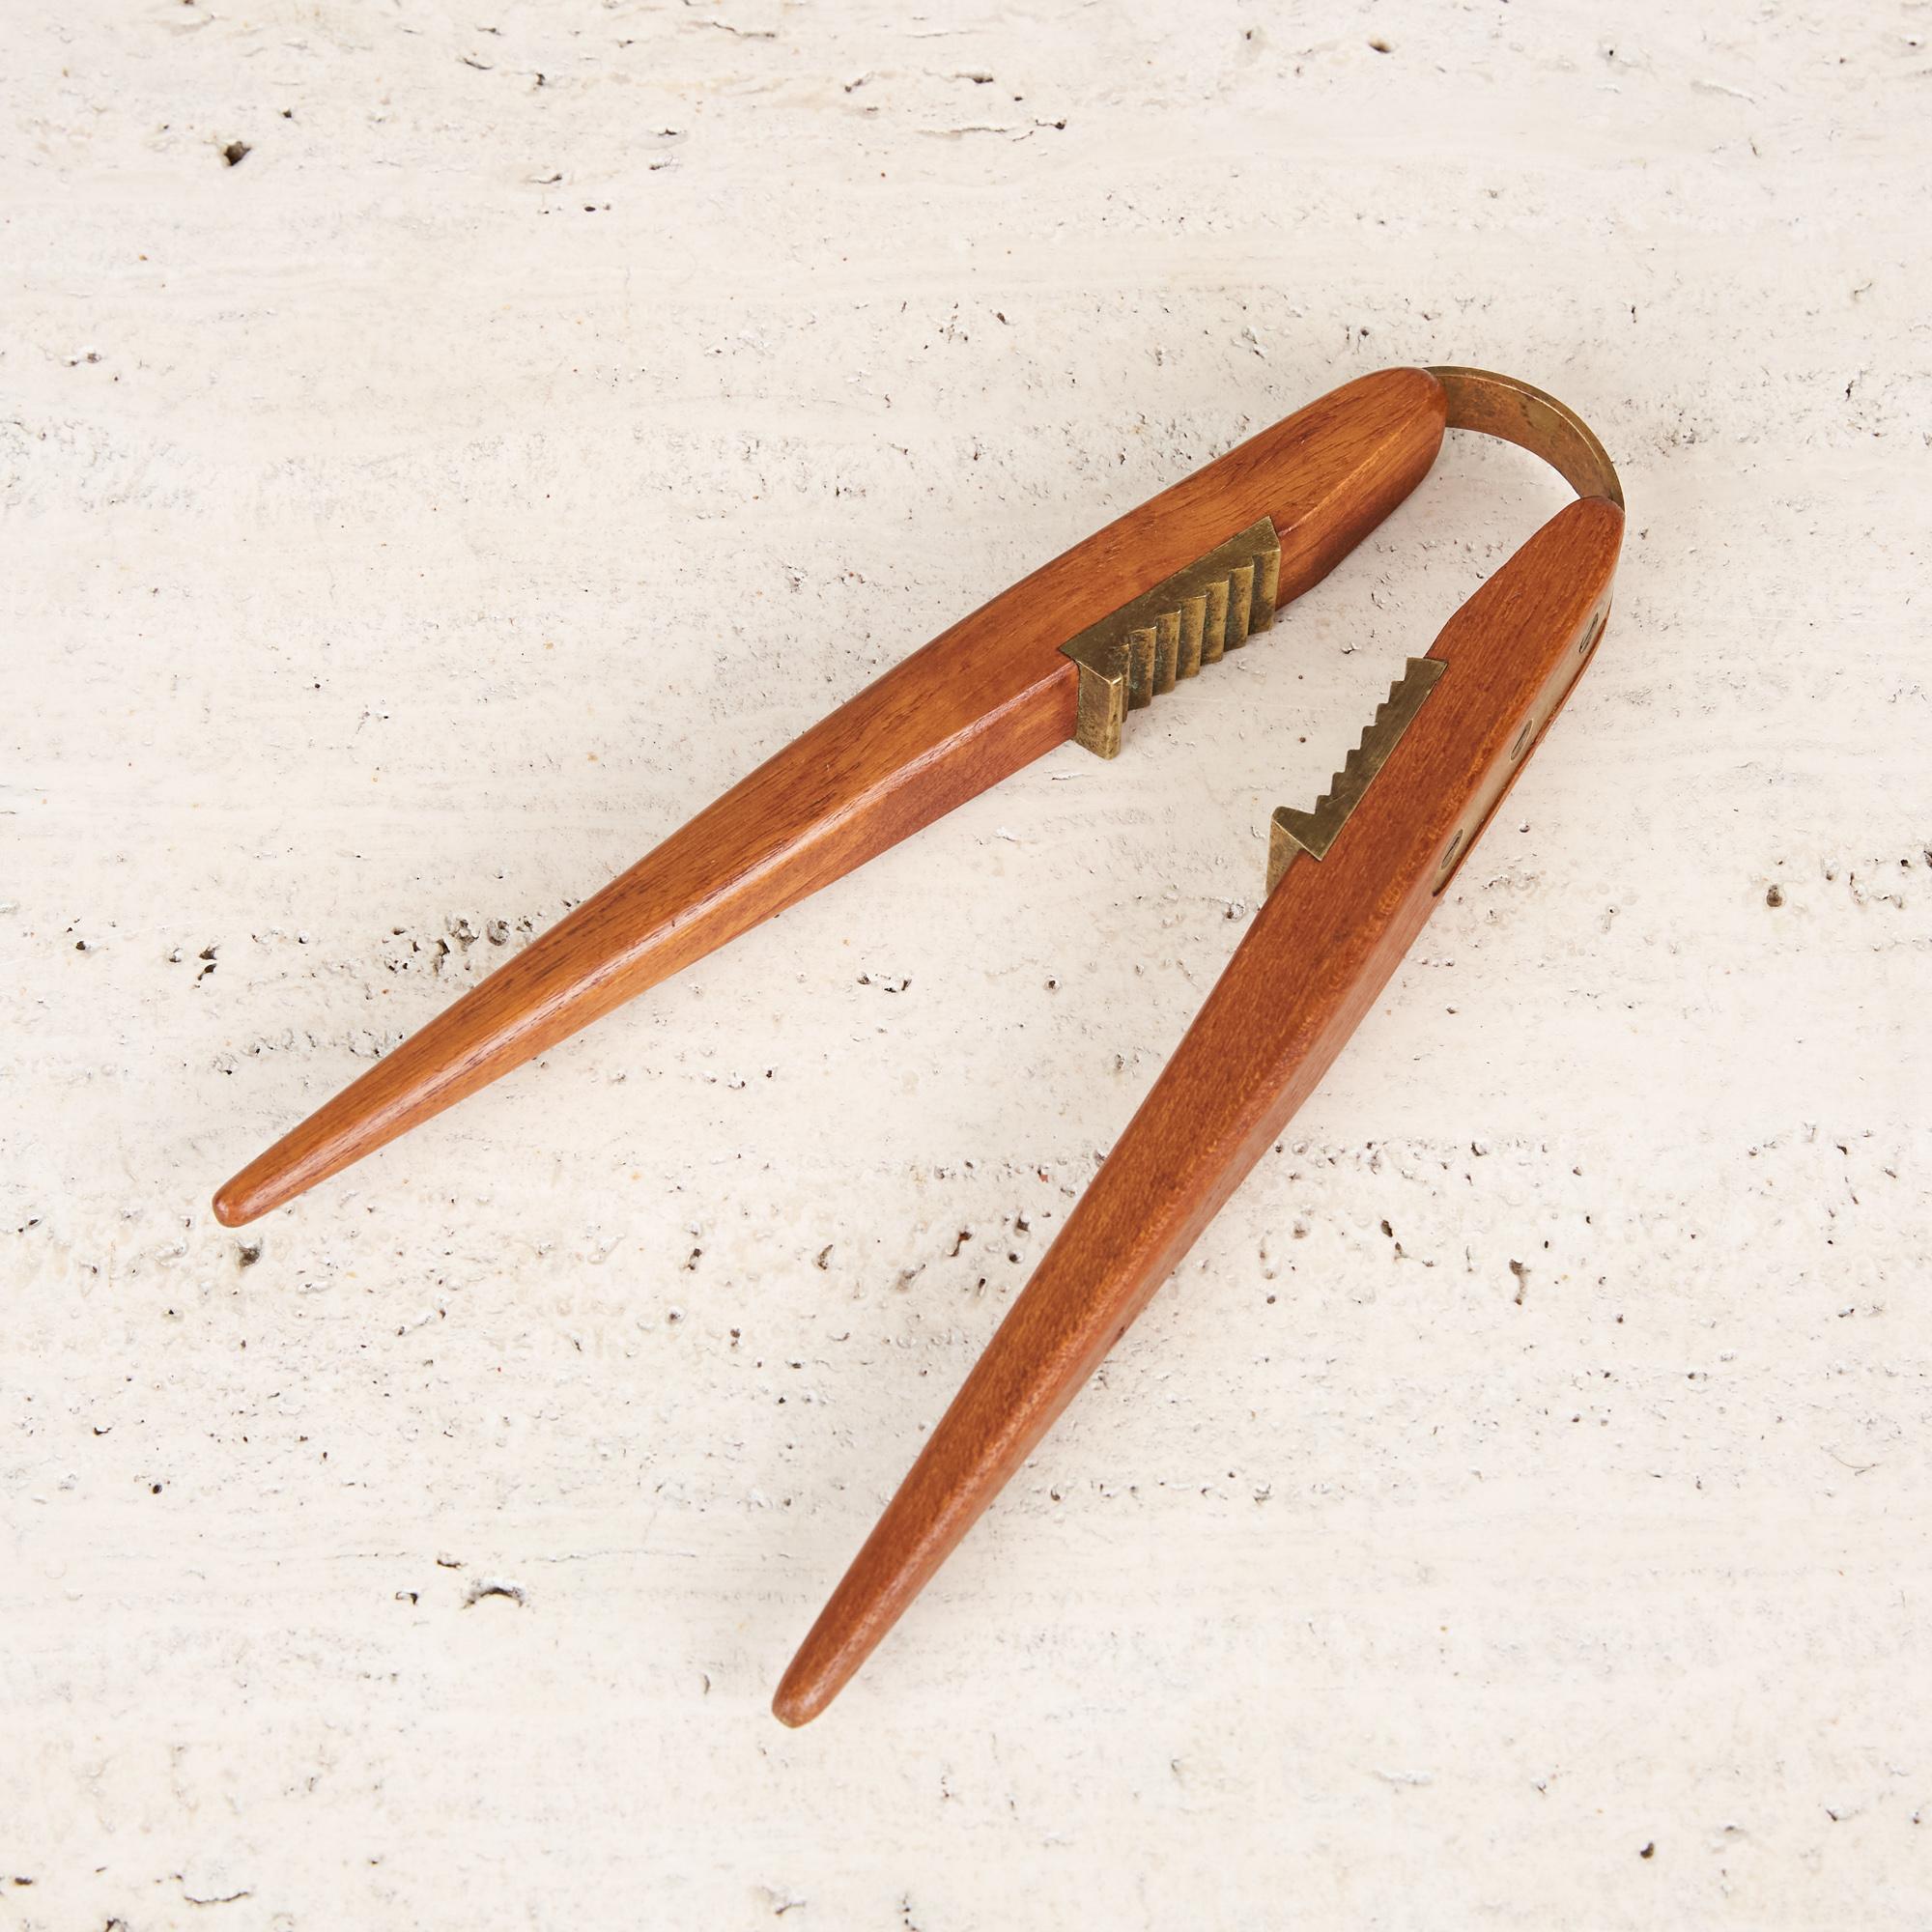 A very clever design dating back to the 1950s, this Poul Knudsen teak and brass nutcracker utilizes a piece of bent brass that acts as a spring mechanism making it possible to crack an entire bowl of nuts in under 2 minutes (we know, because we